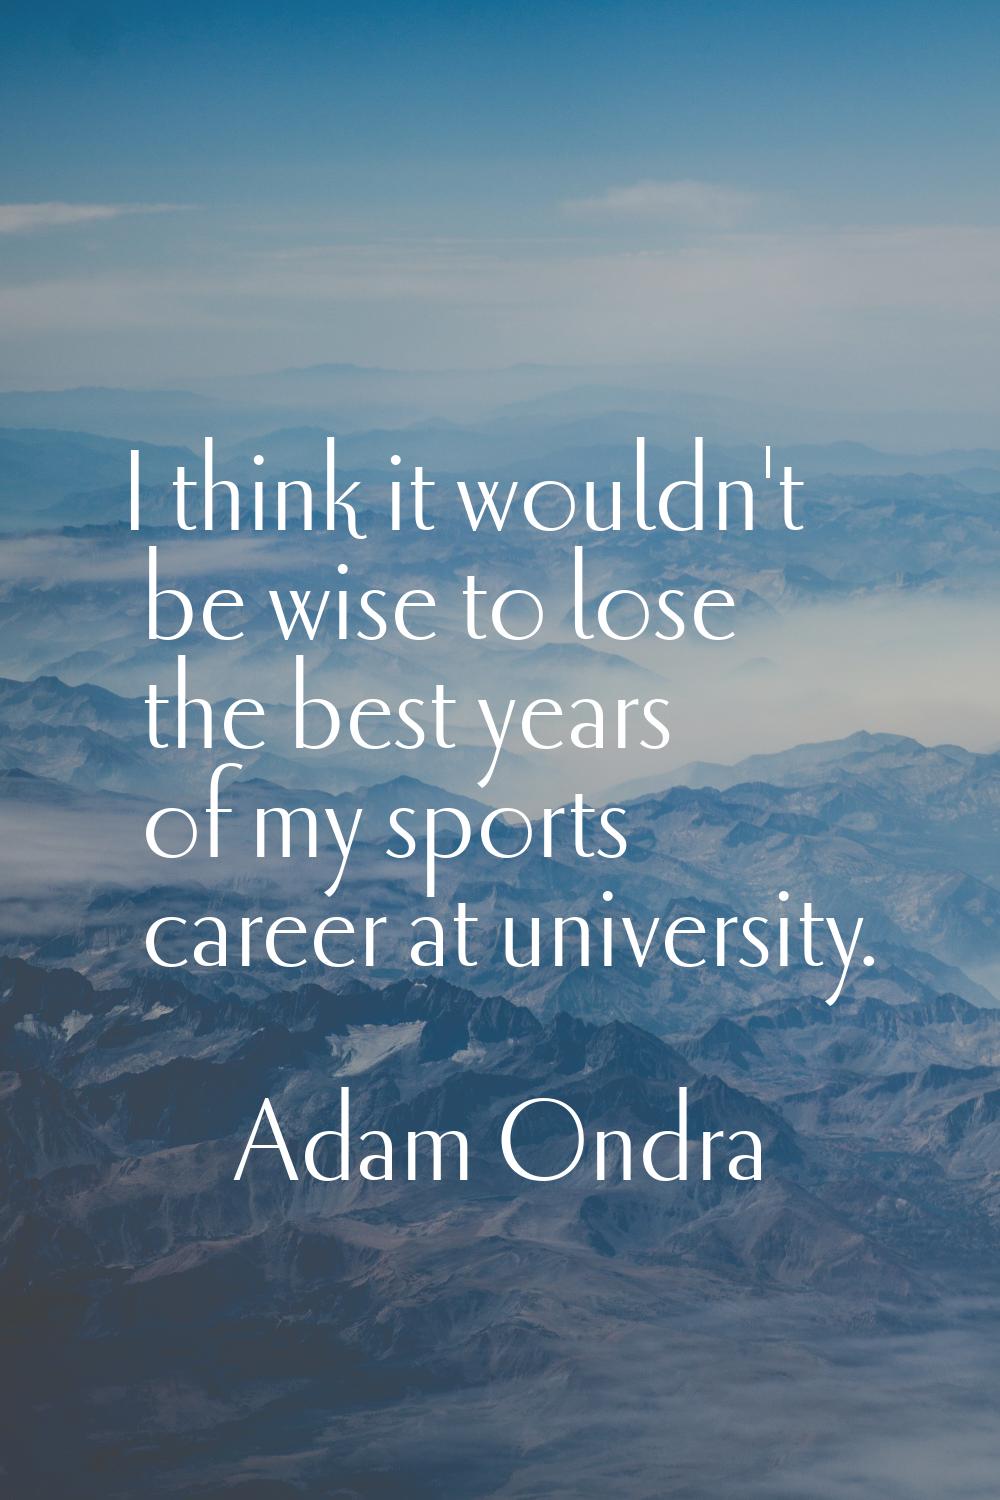 I think it wouldn't be wise to lose the best years of my sports career at university.